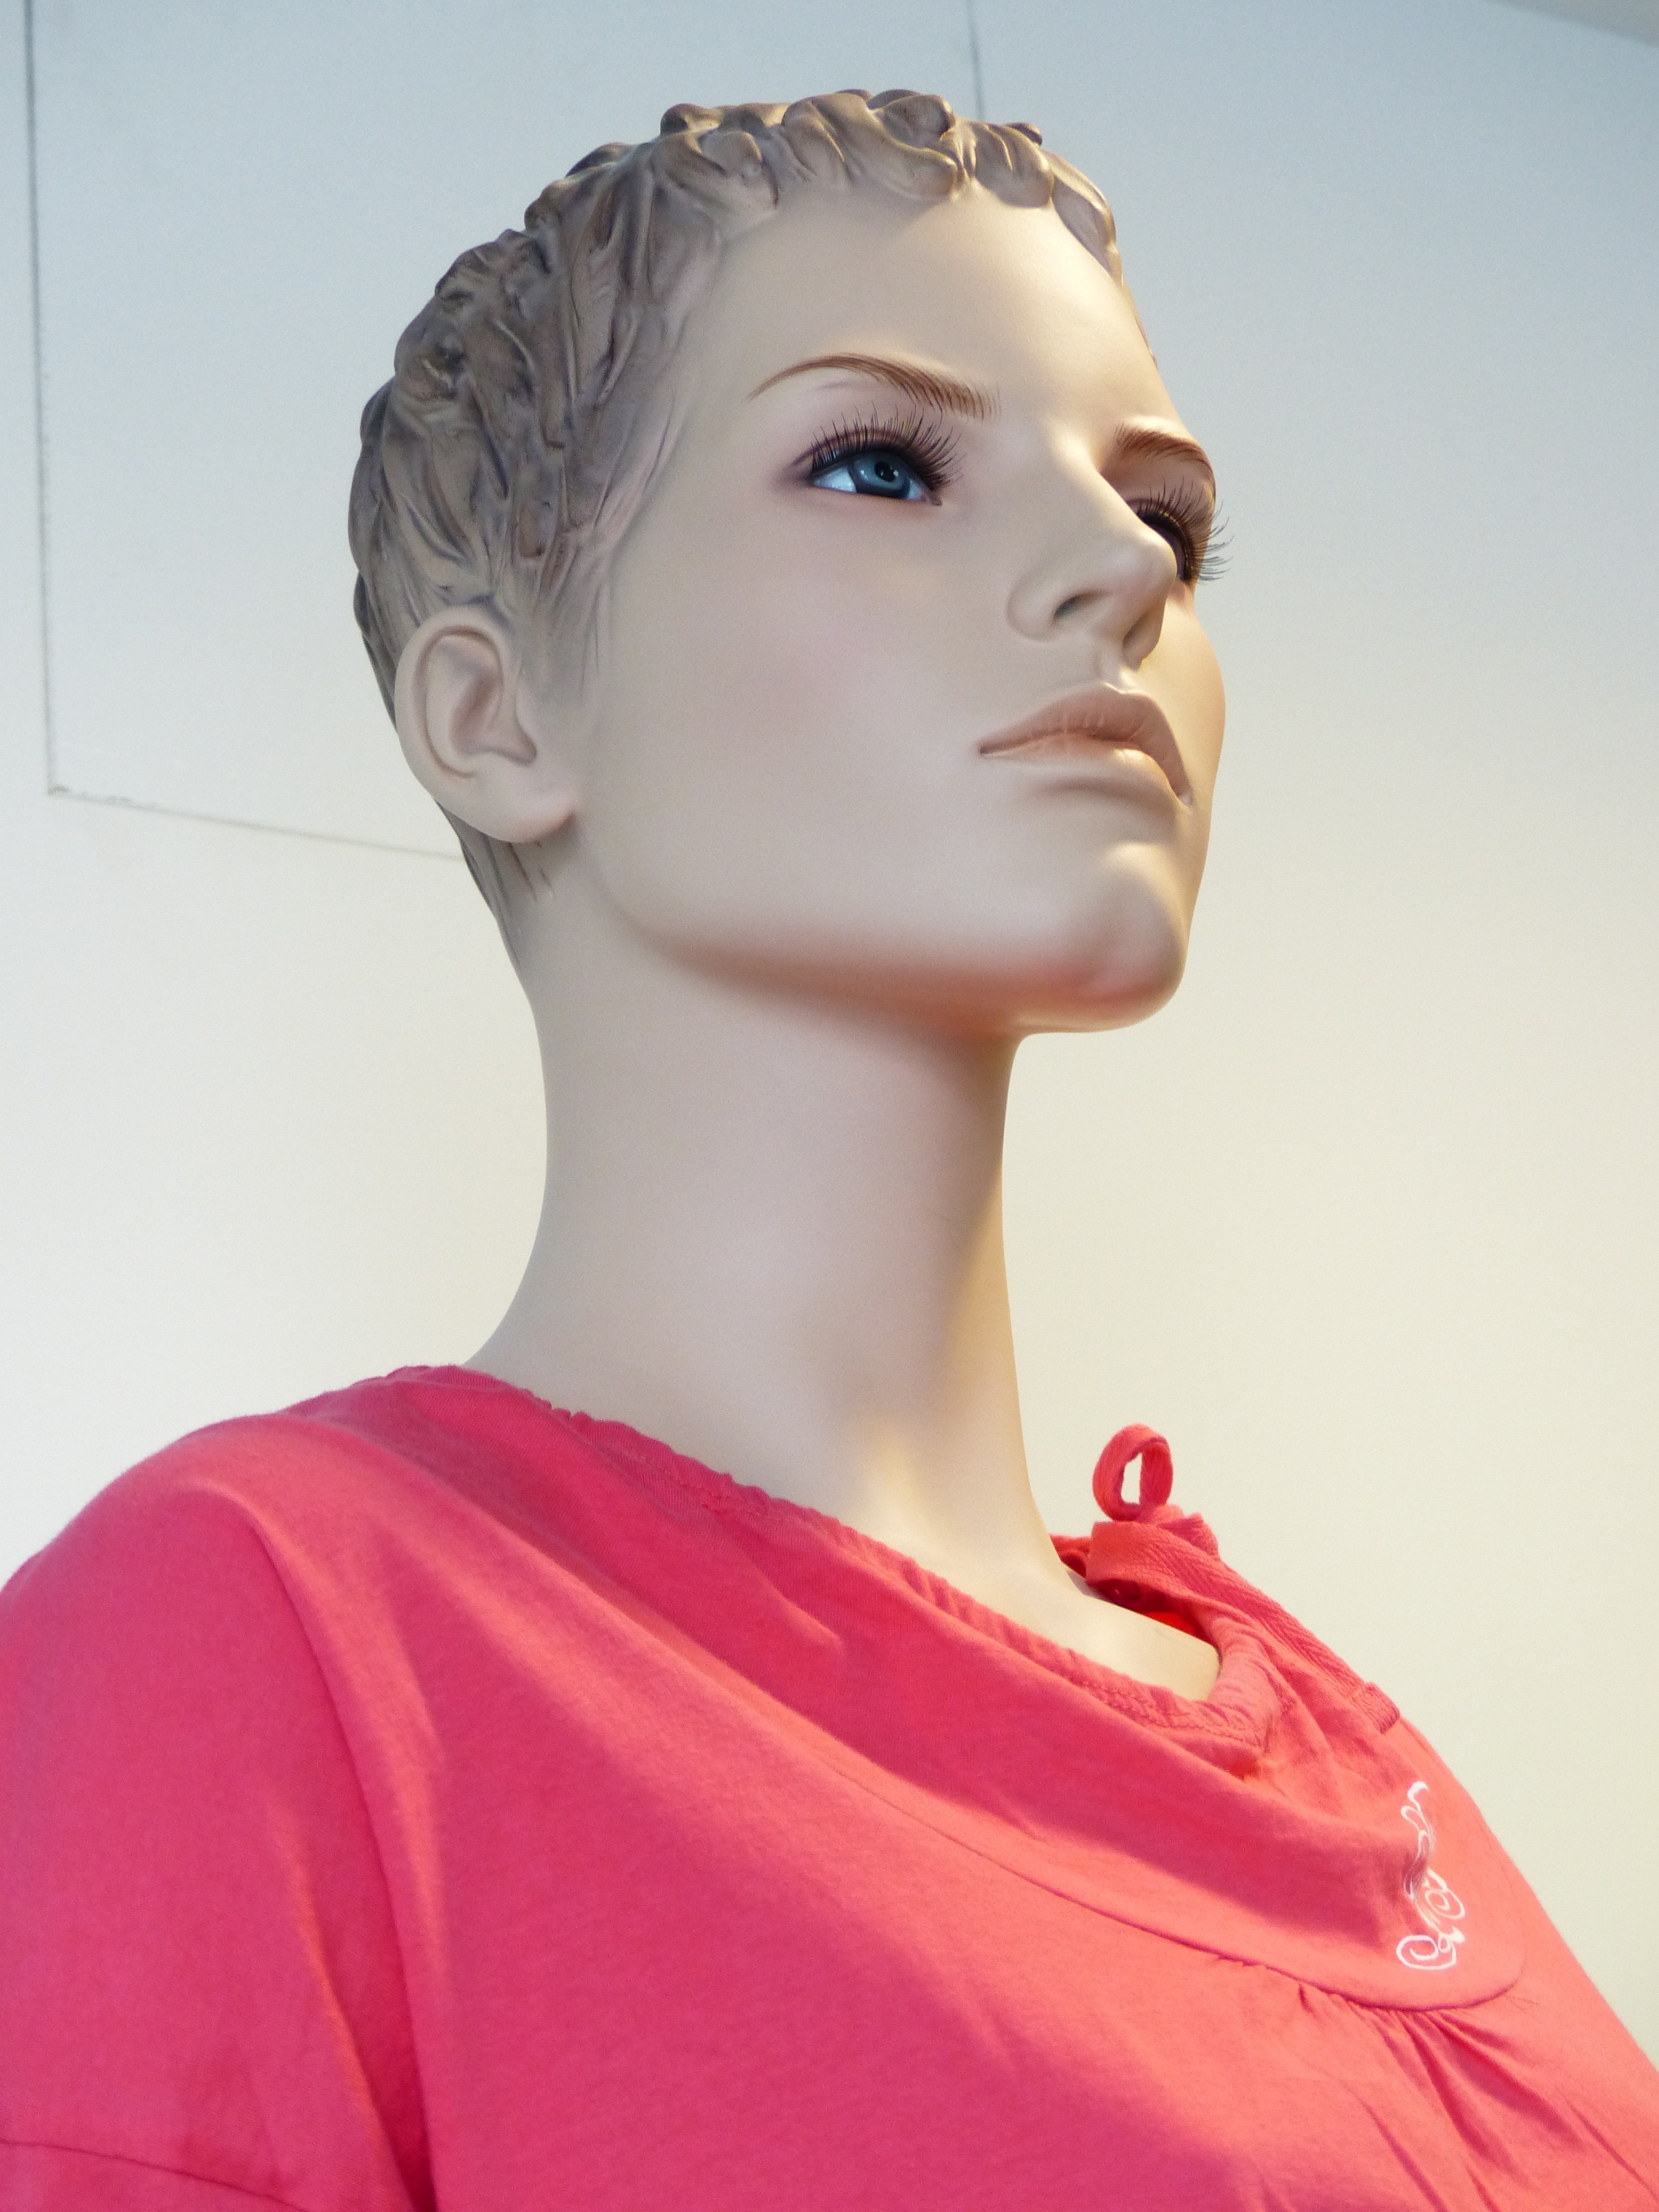 female mannequin in red shirt